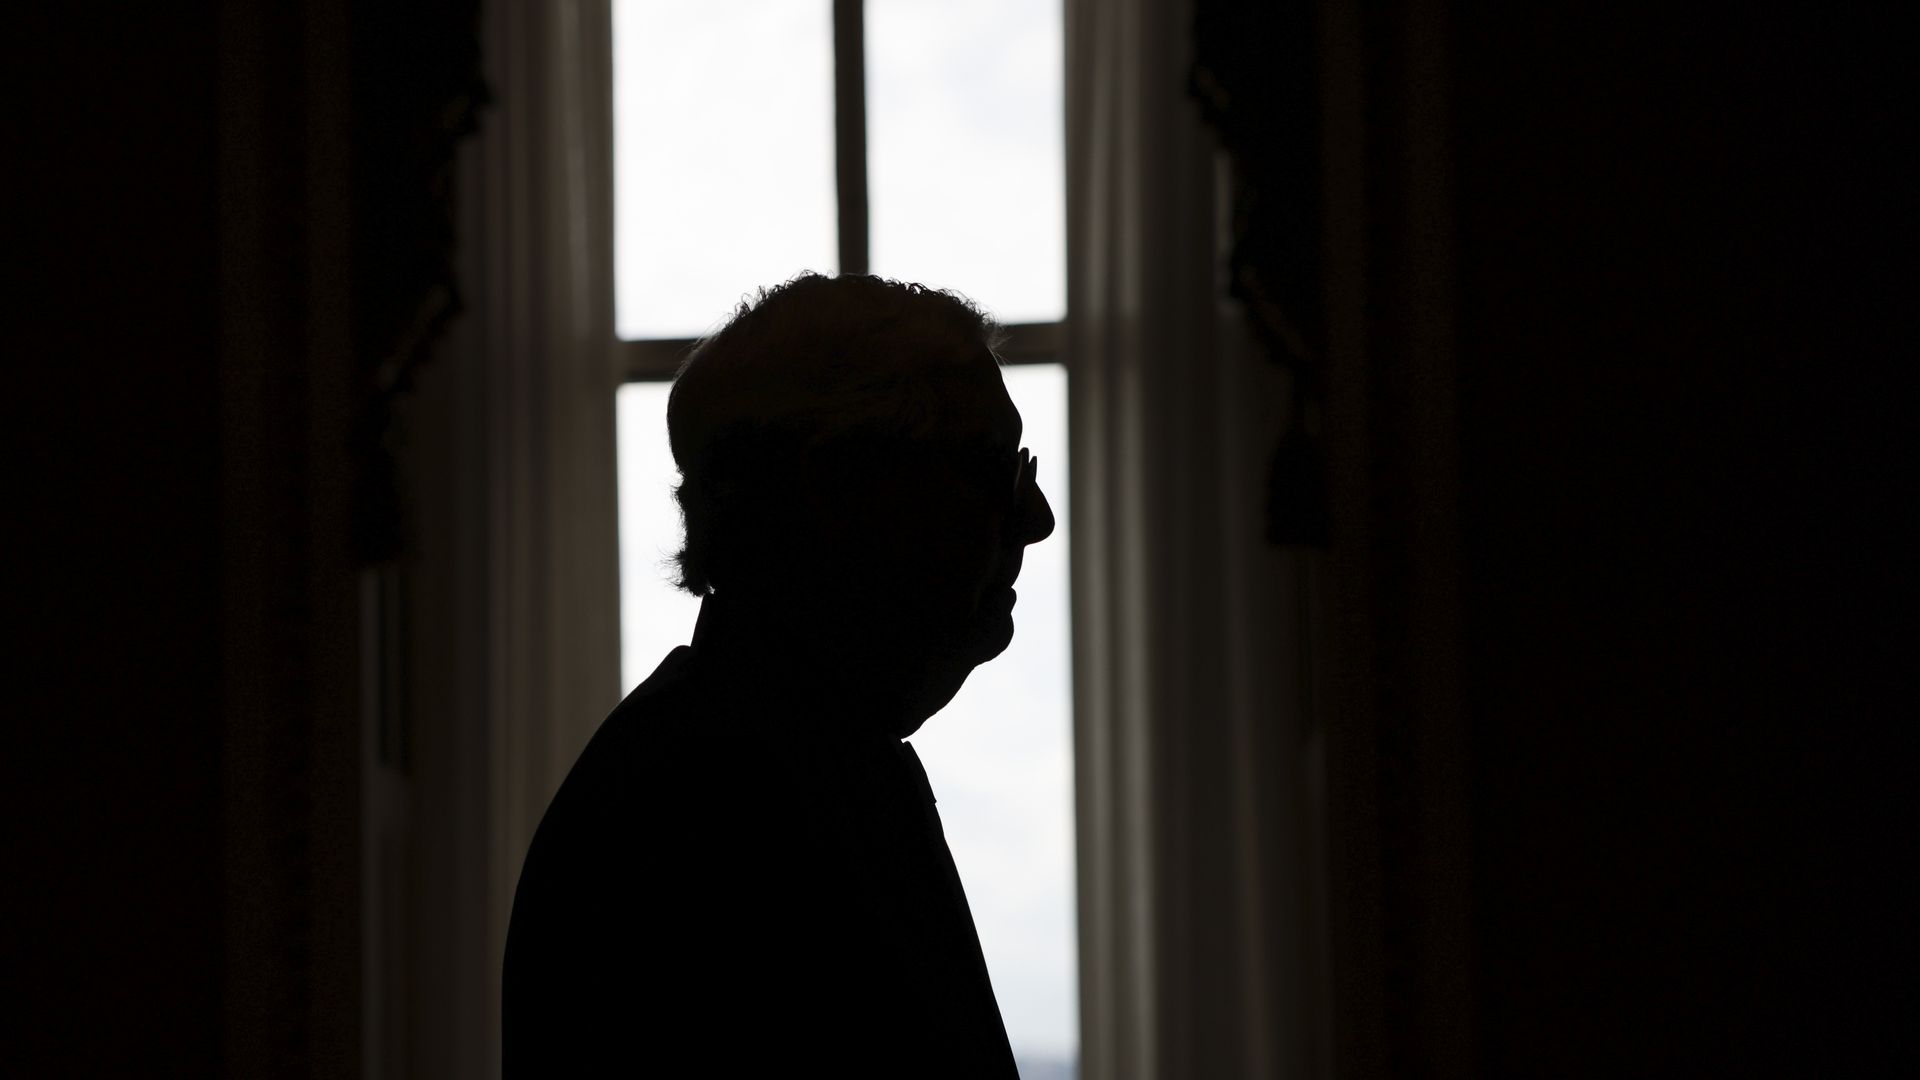 Senate Minority Leader Mitch McConnell is seen in silhouette Thursday as he walks through the Capitol.